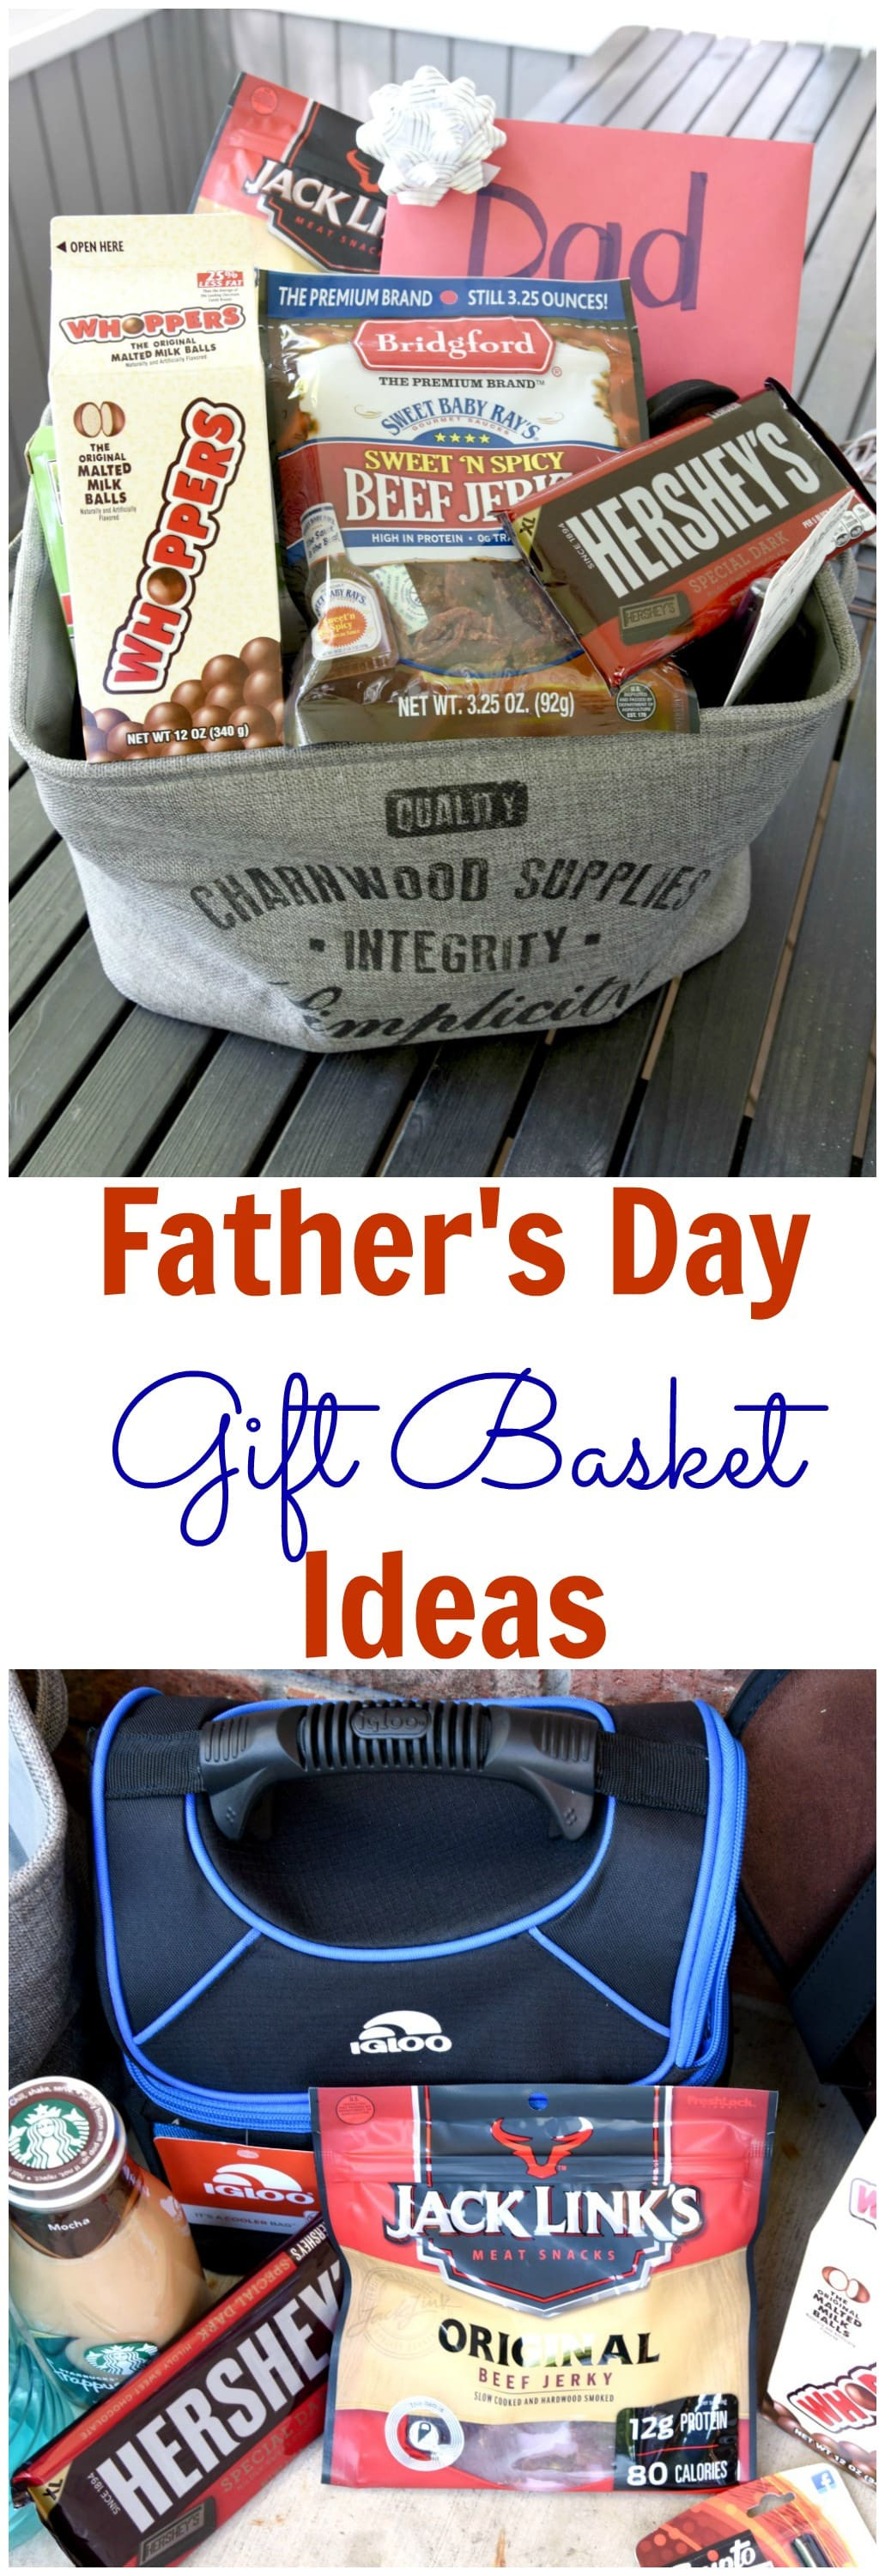 Fathers Day Gift Basket Ideas
 Tips to Create a Father s Day Gift Basket Dad will Love